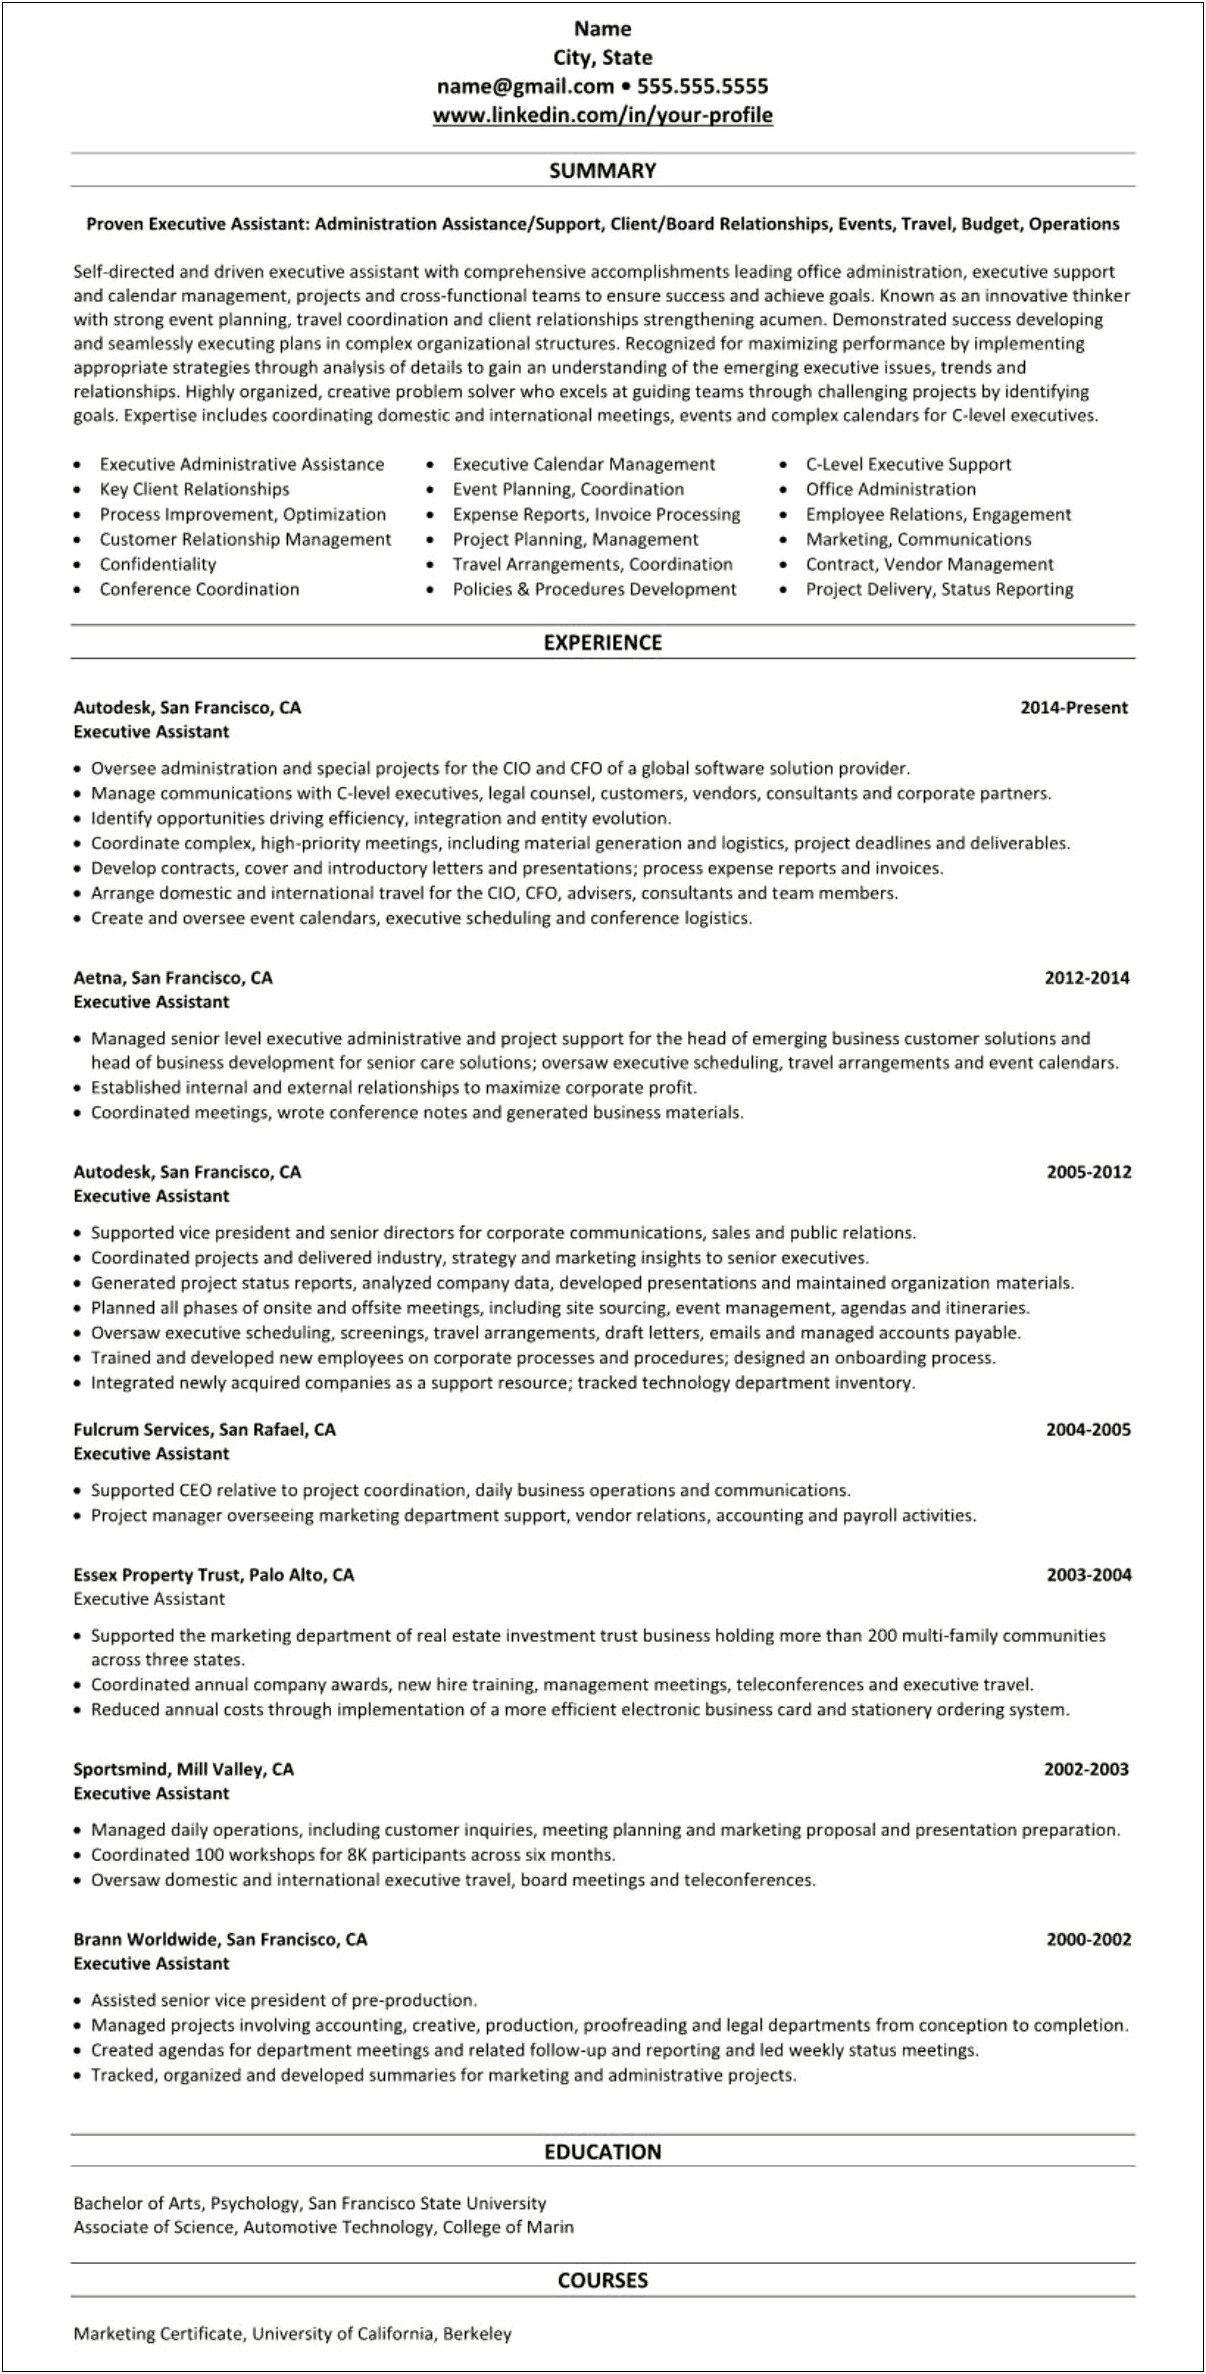 Administrative Assistant Professional Summary For Resume